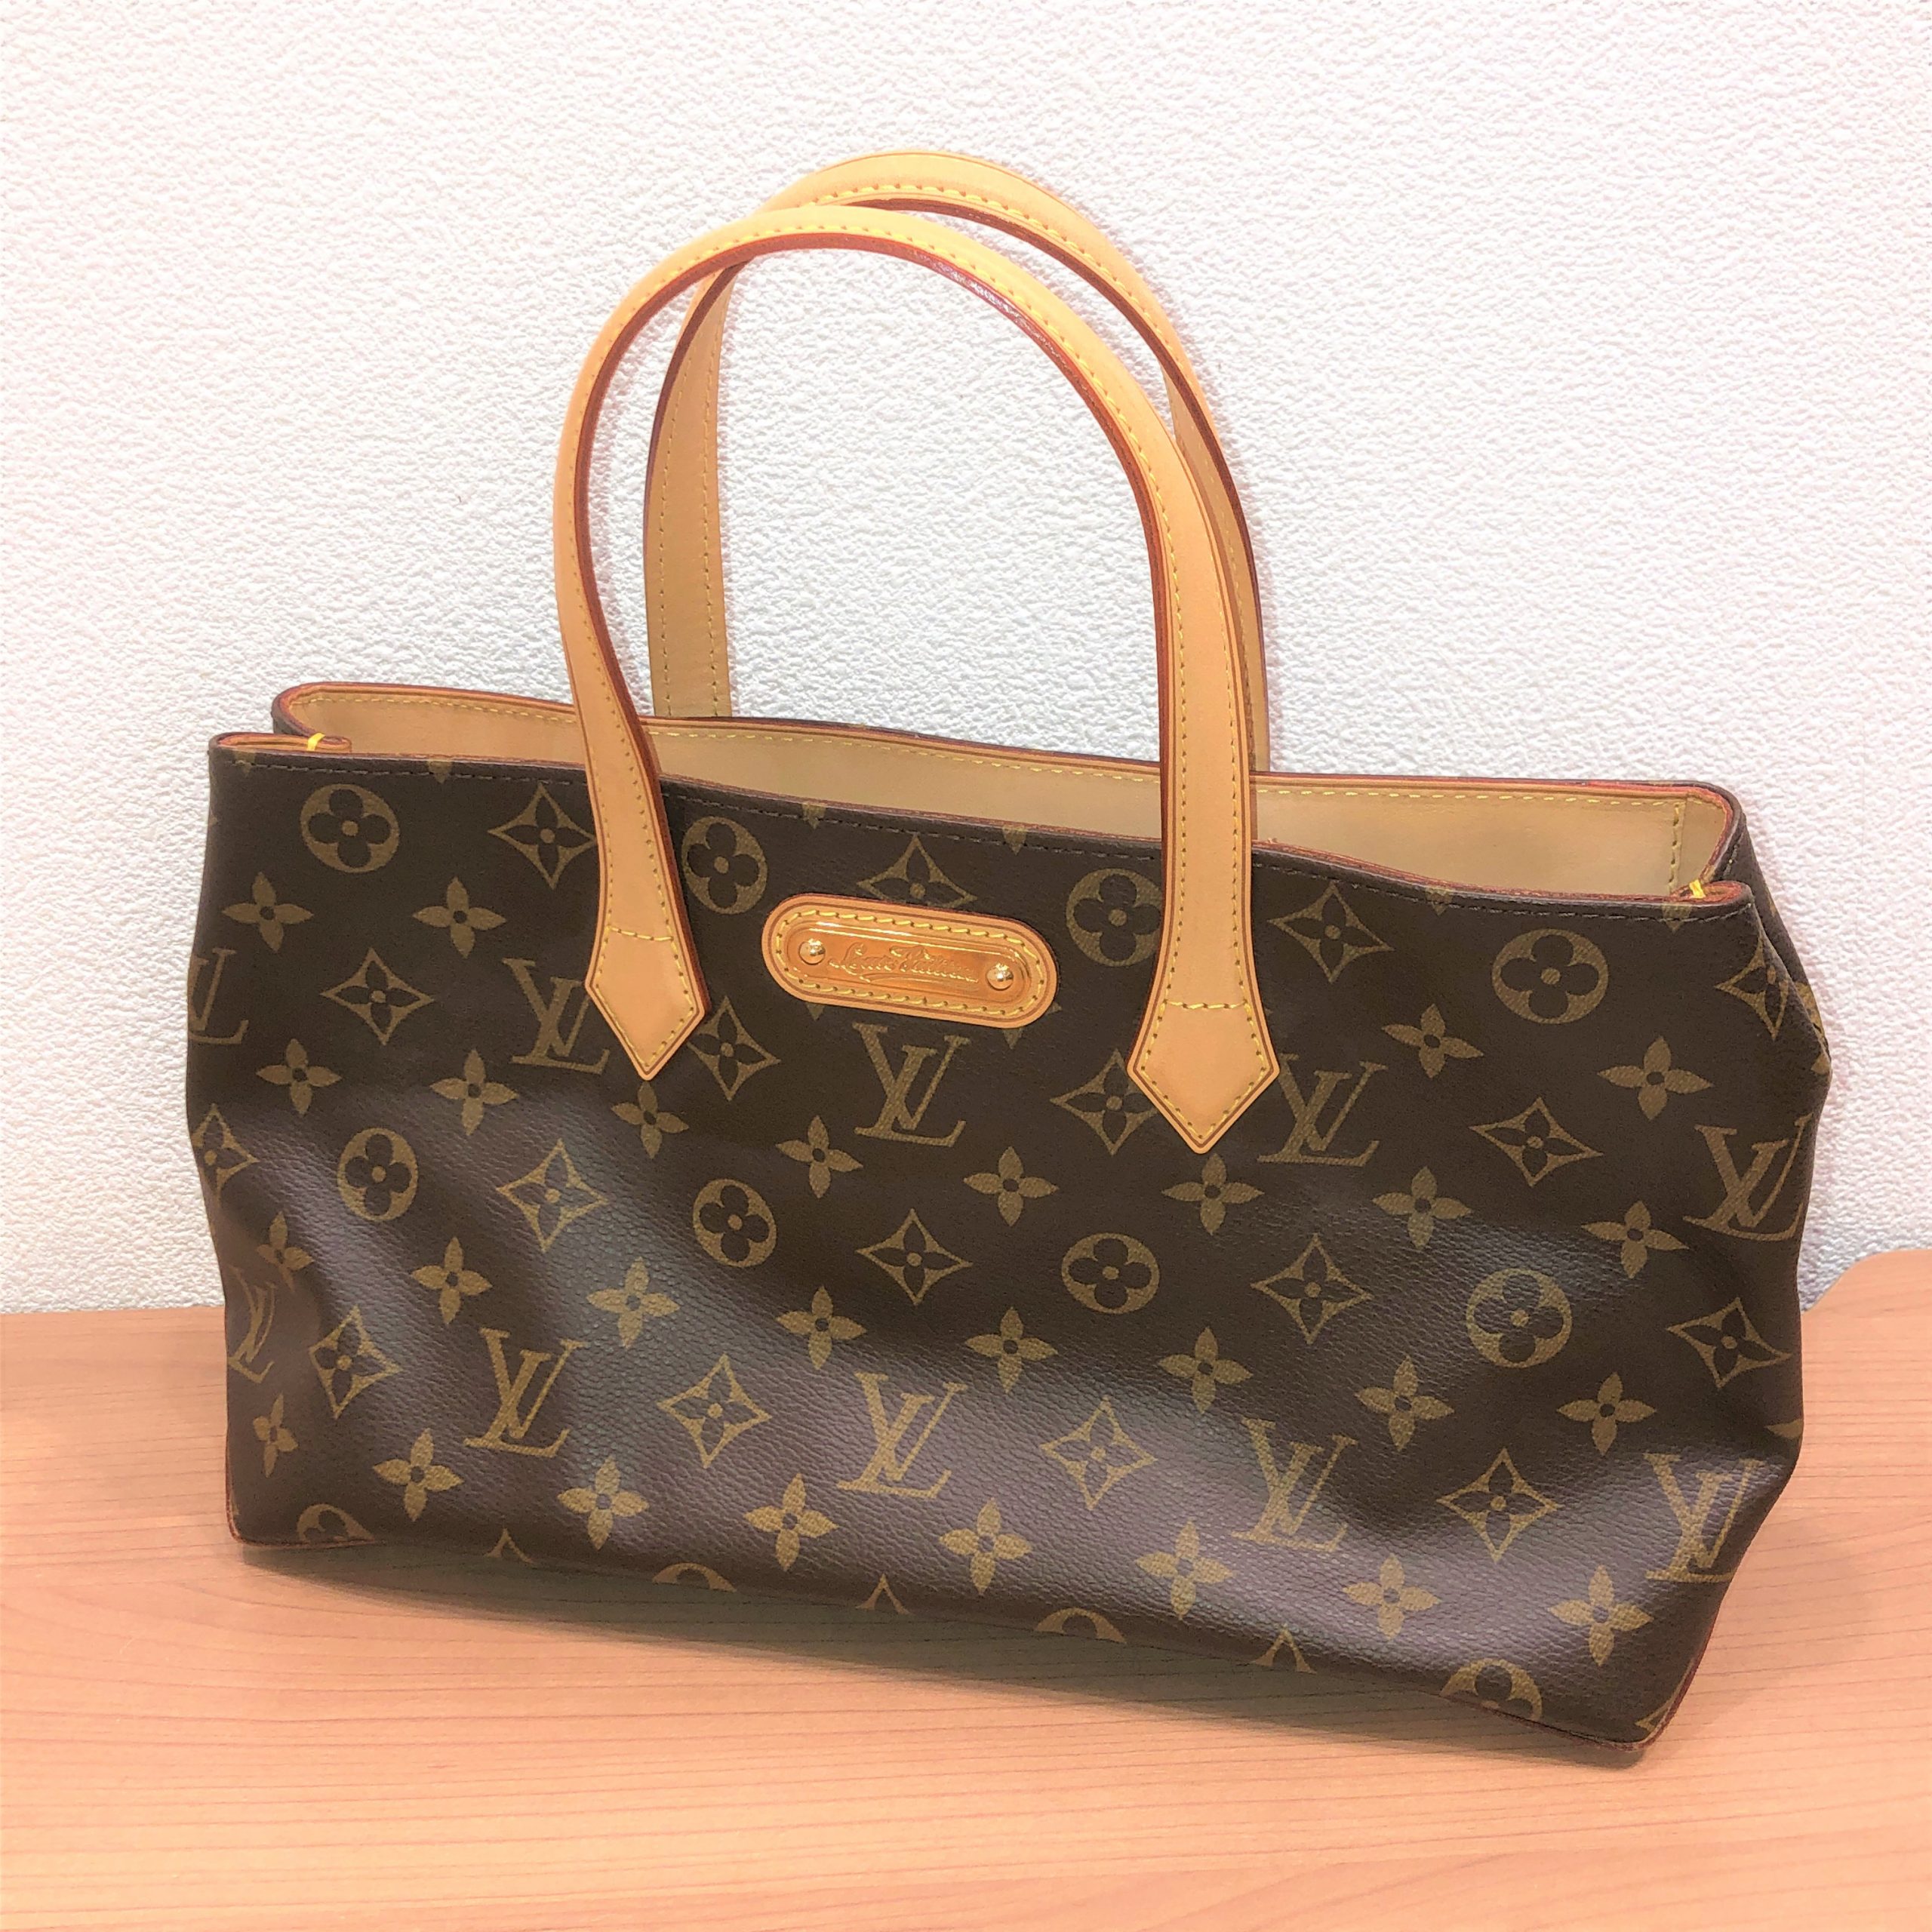 【LOUIS VUITTON/ルイヴィトン】ウィルシャーPM